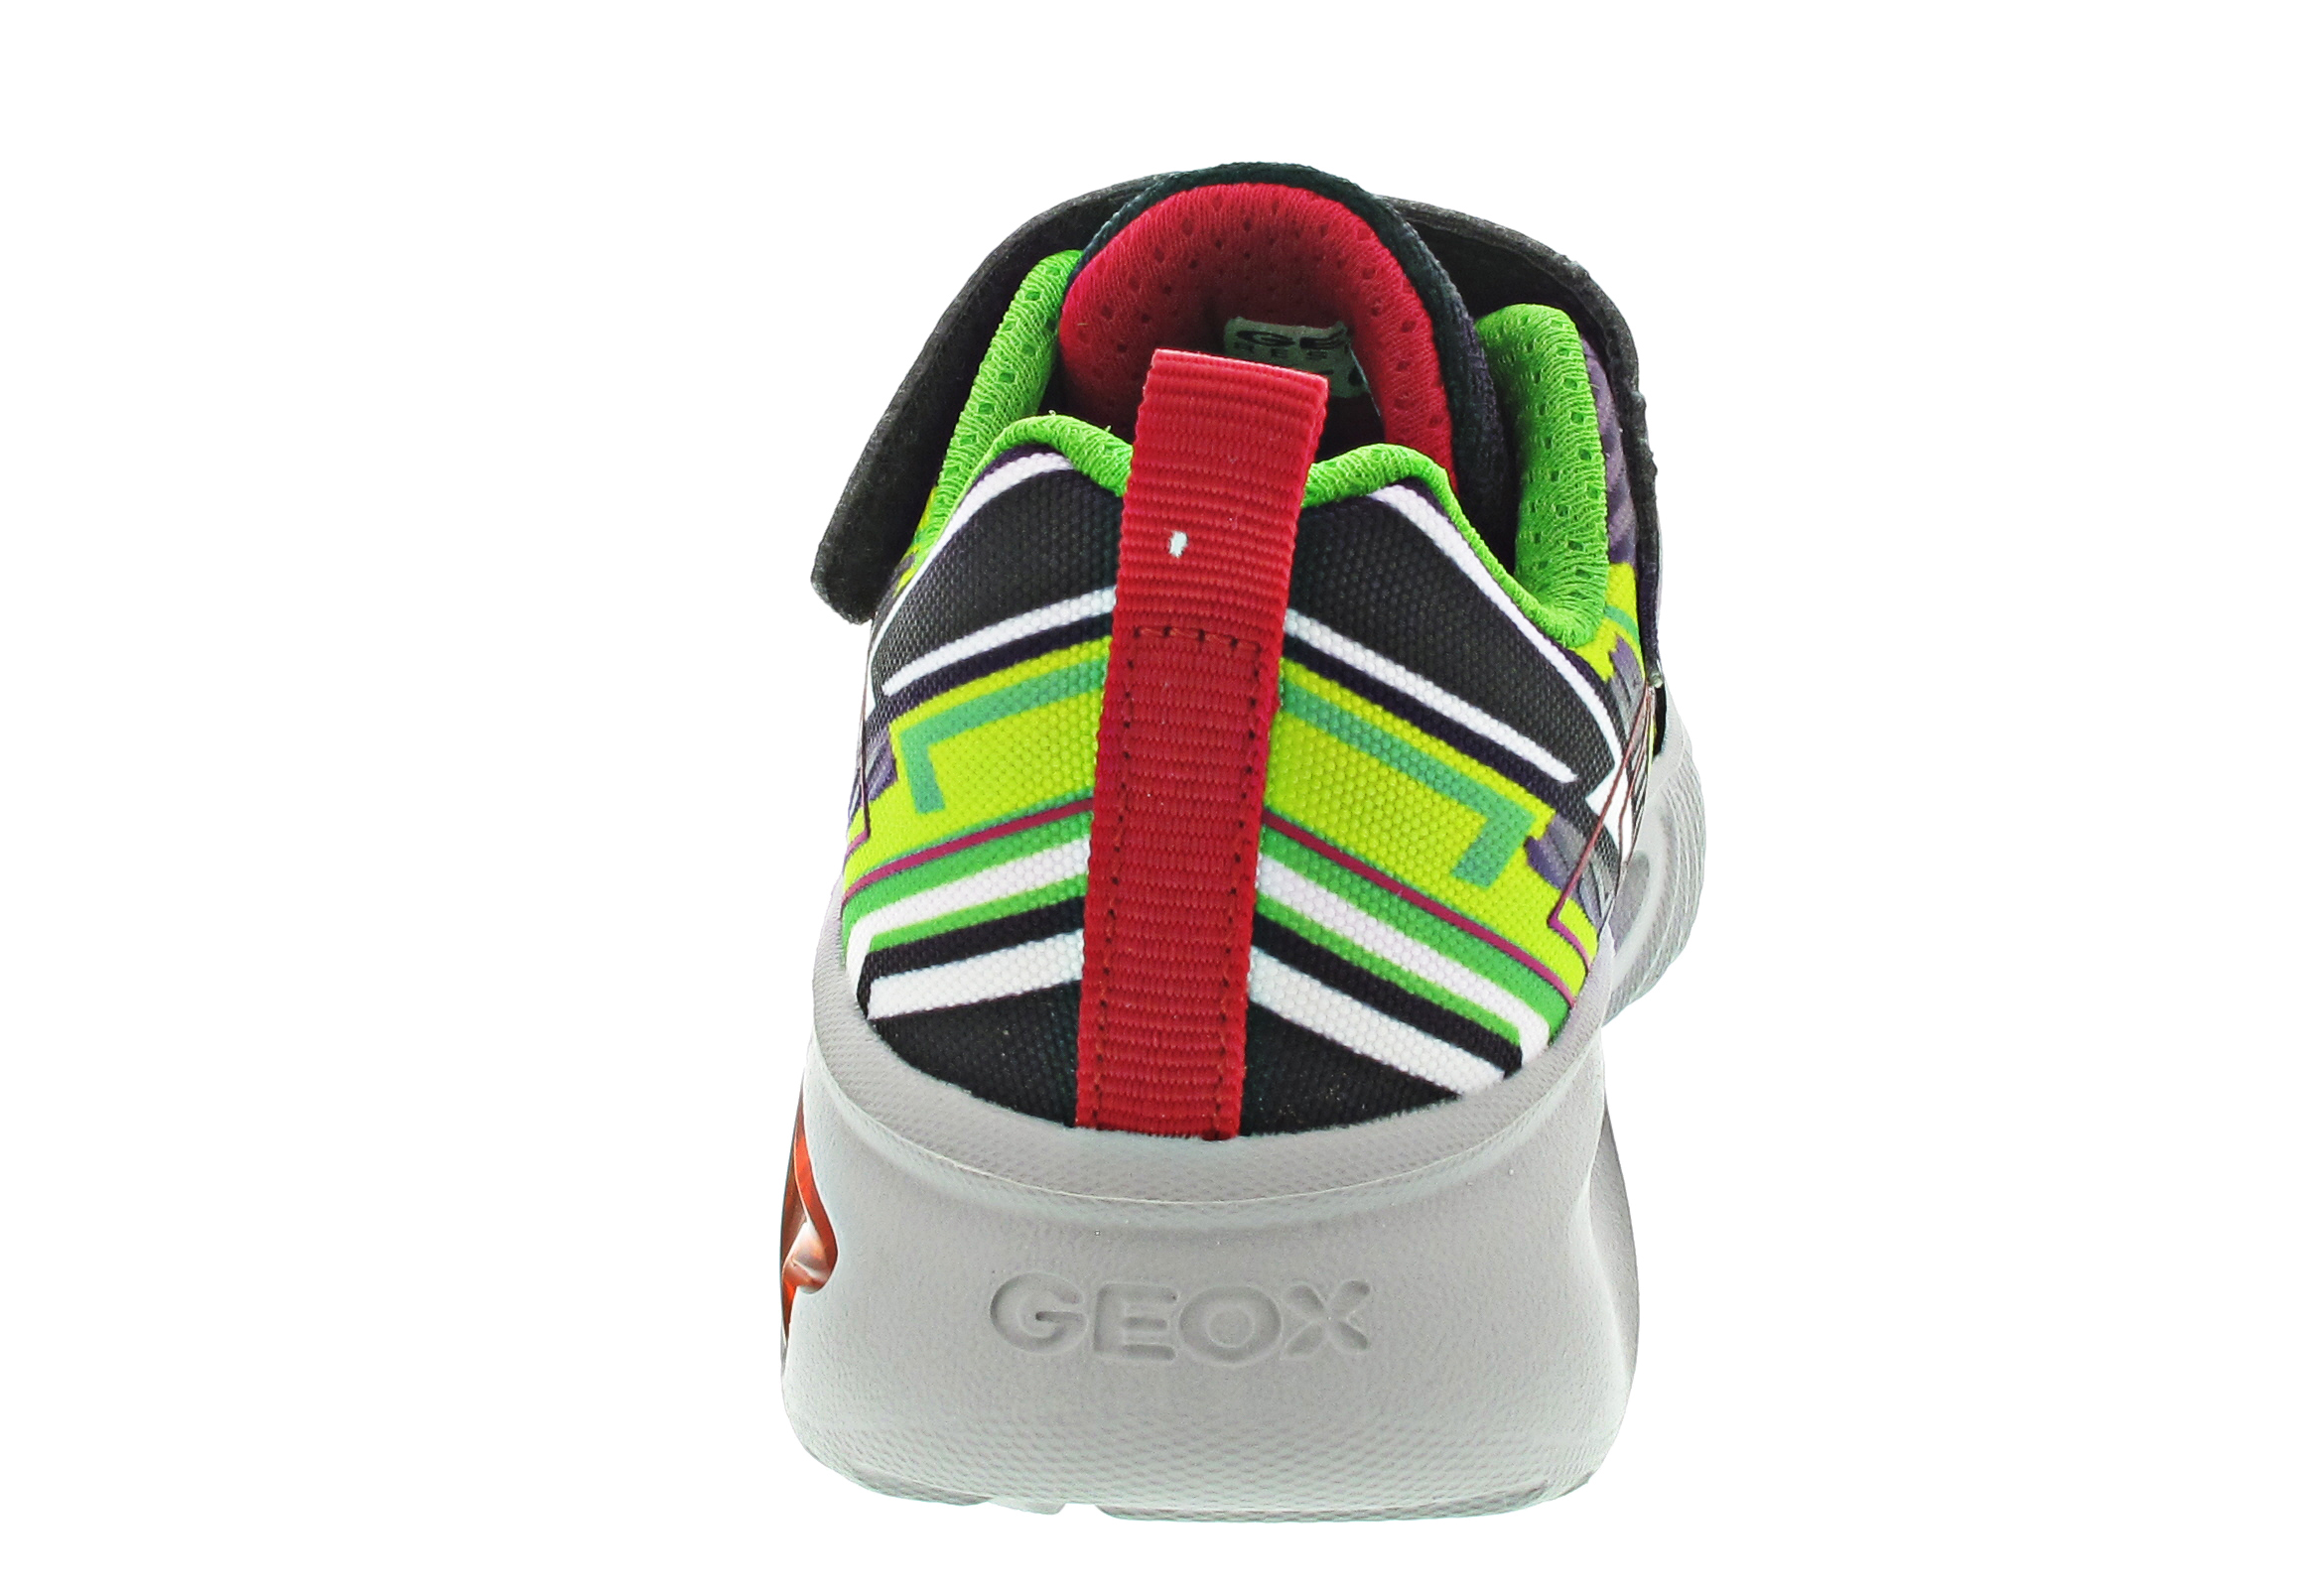 Geox Assister